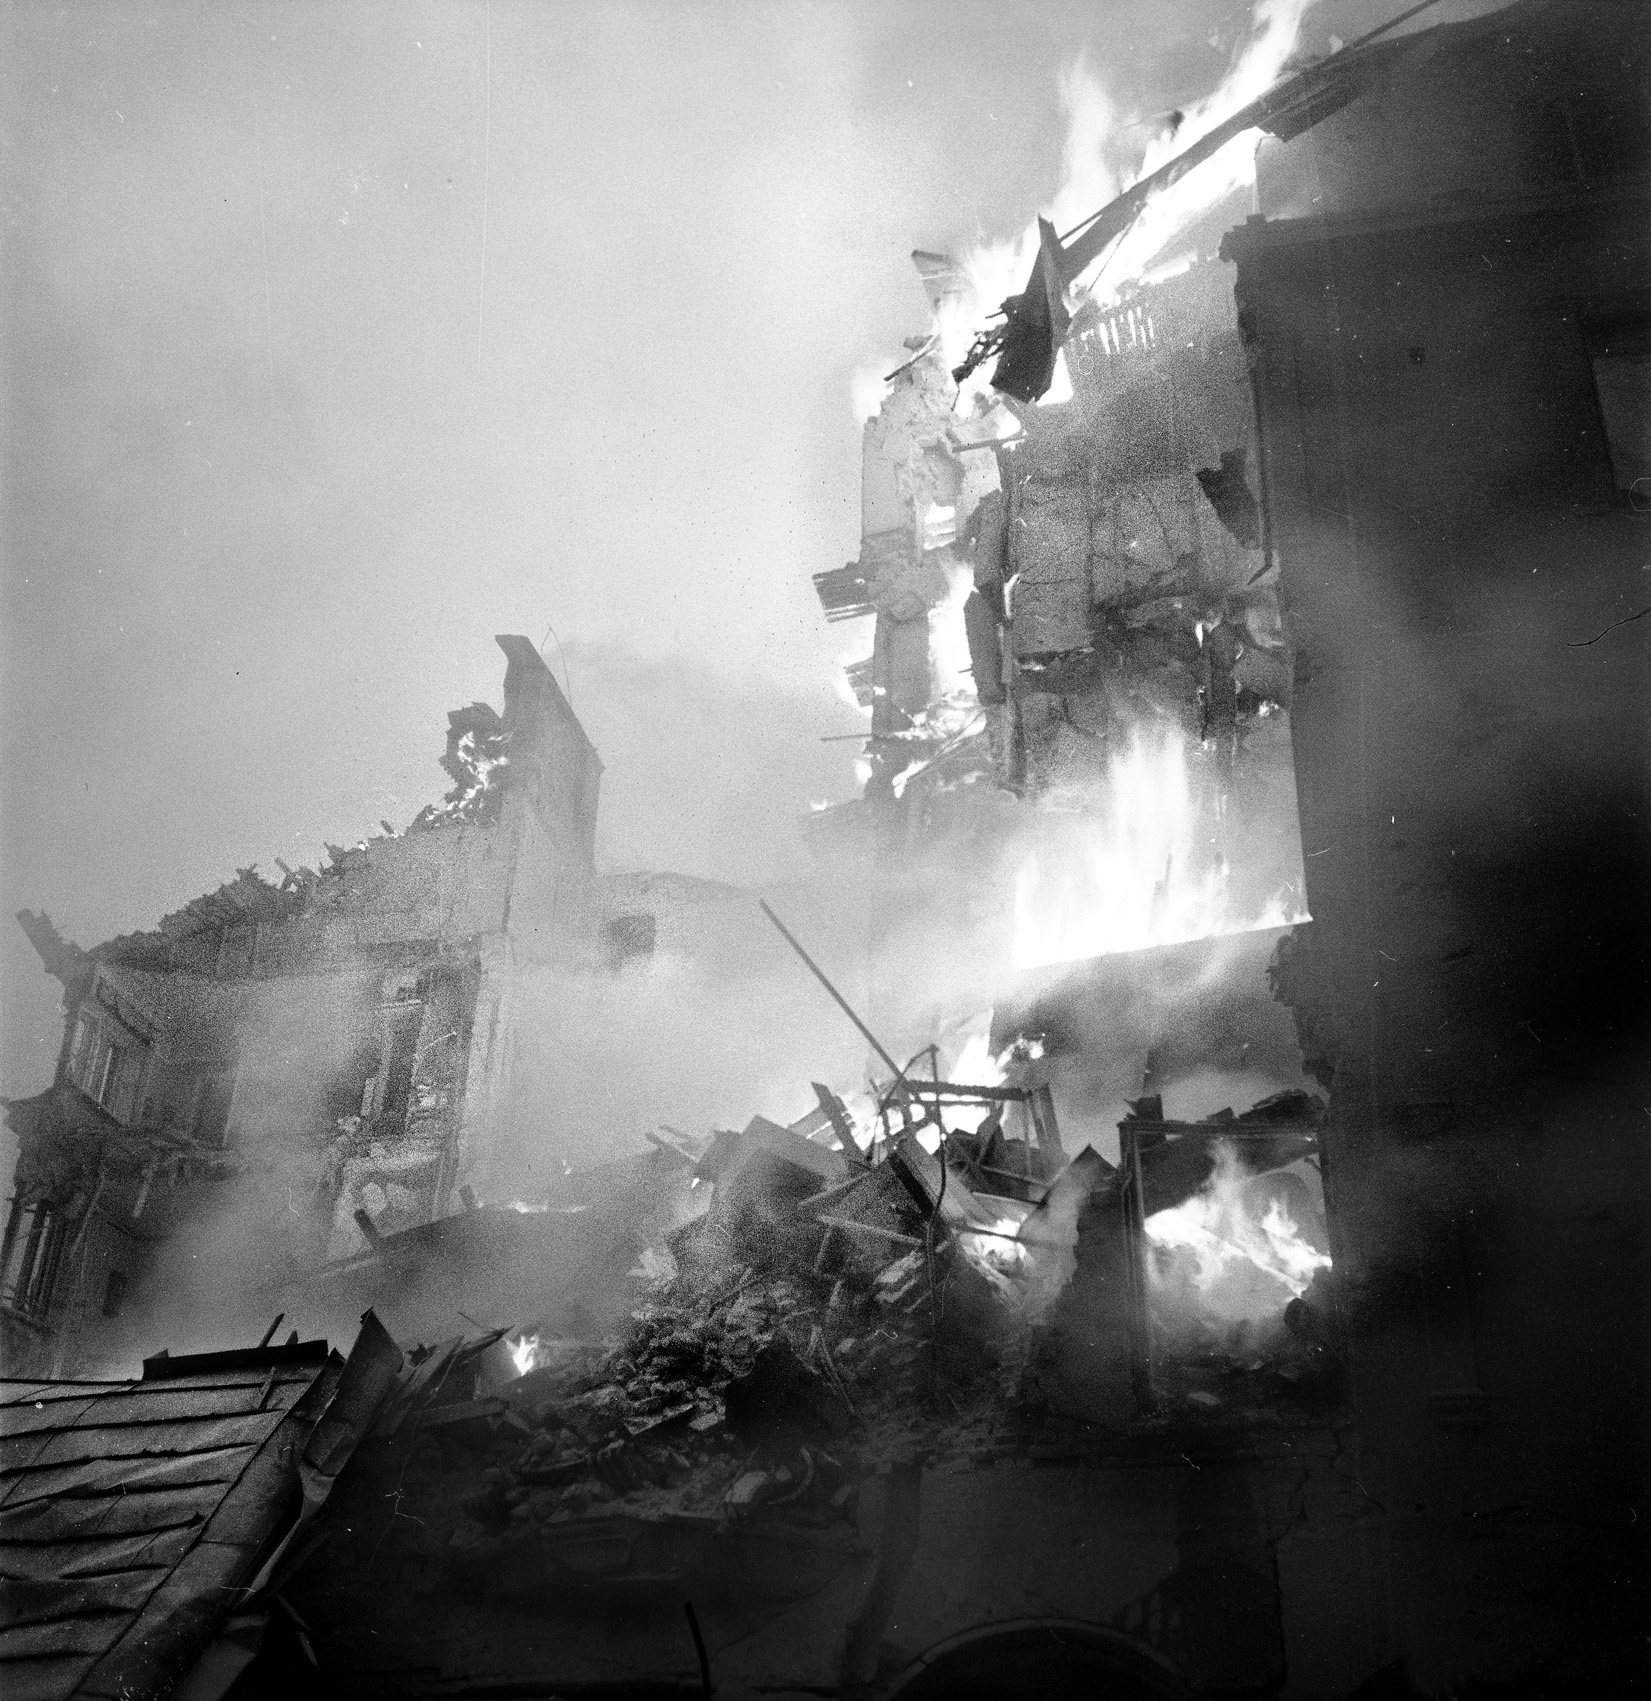 Buildings in the Finnish capital Helsinki burn after one of eight Soviet bombings during the Winter War that killed 97 civilians. The U.S. protested, but was rebuffed by the Soviets.